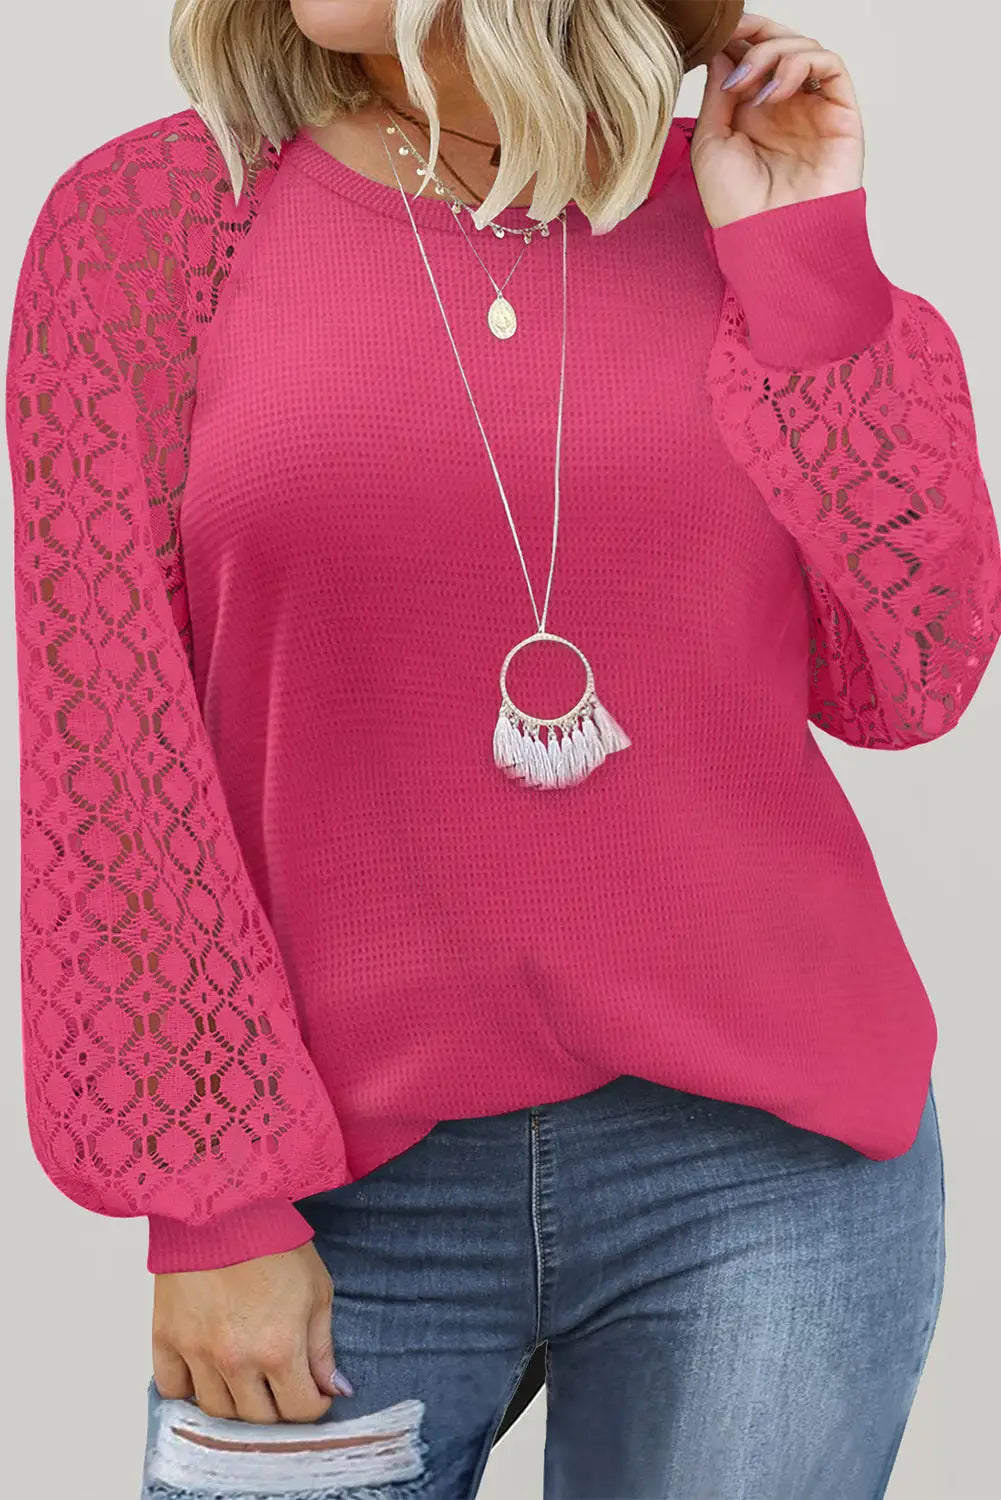 Red sequin mardi gras lace raglan sleeve plus size pullover - strawberry pink / 1x 95% polyester + 5% elastane graphic